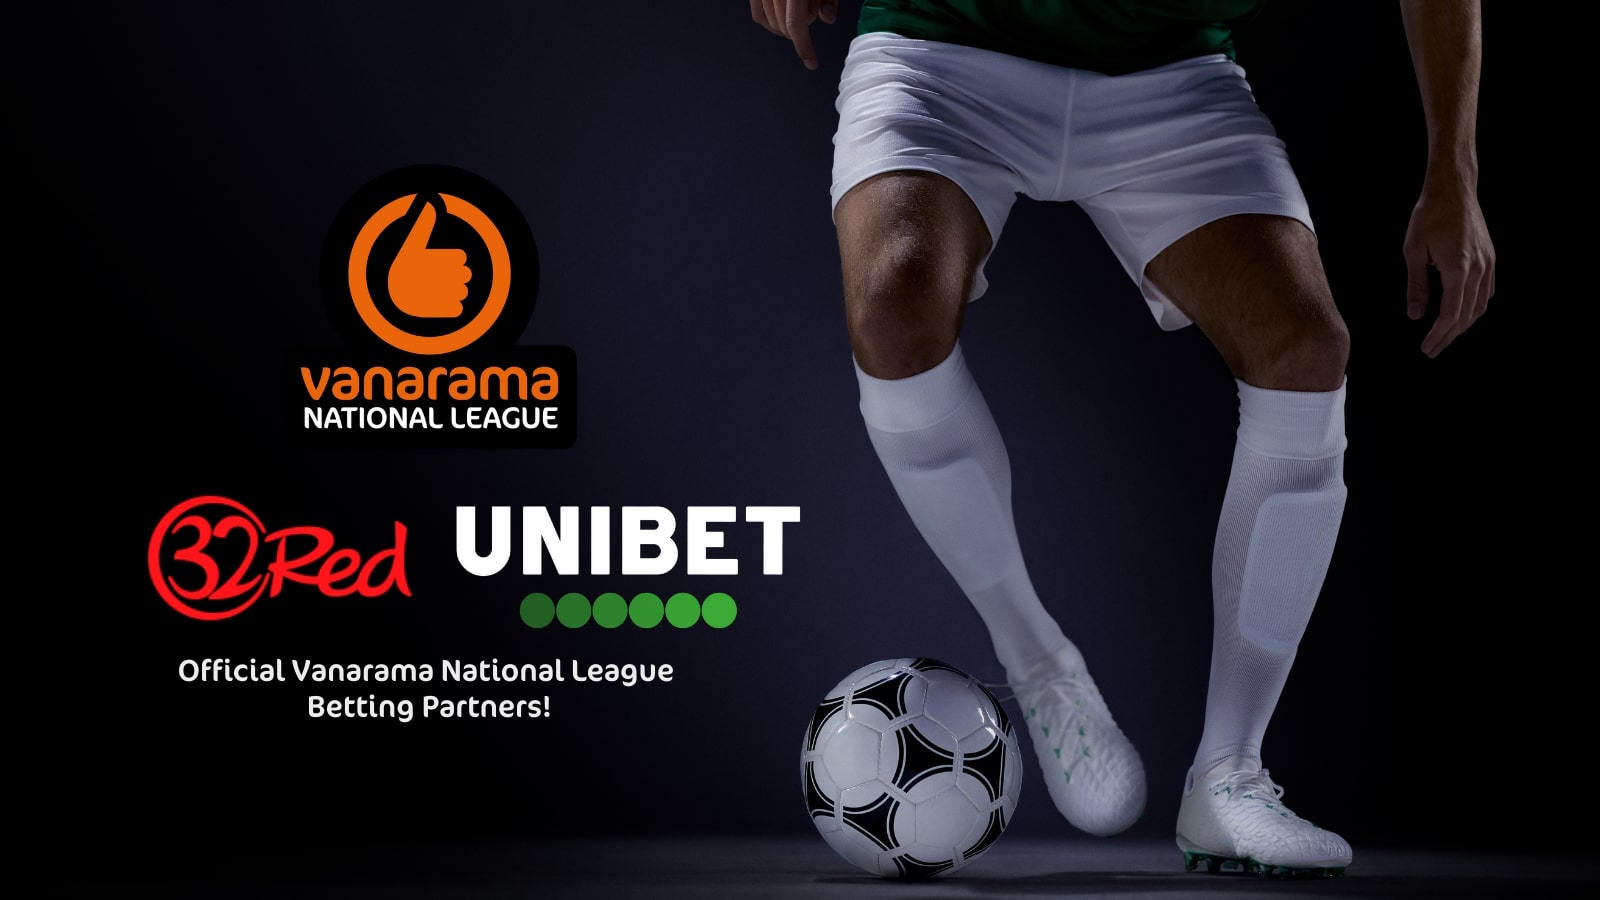 Unibet and 32Red become The National League’s new Betting Partner